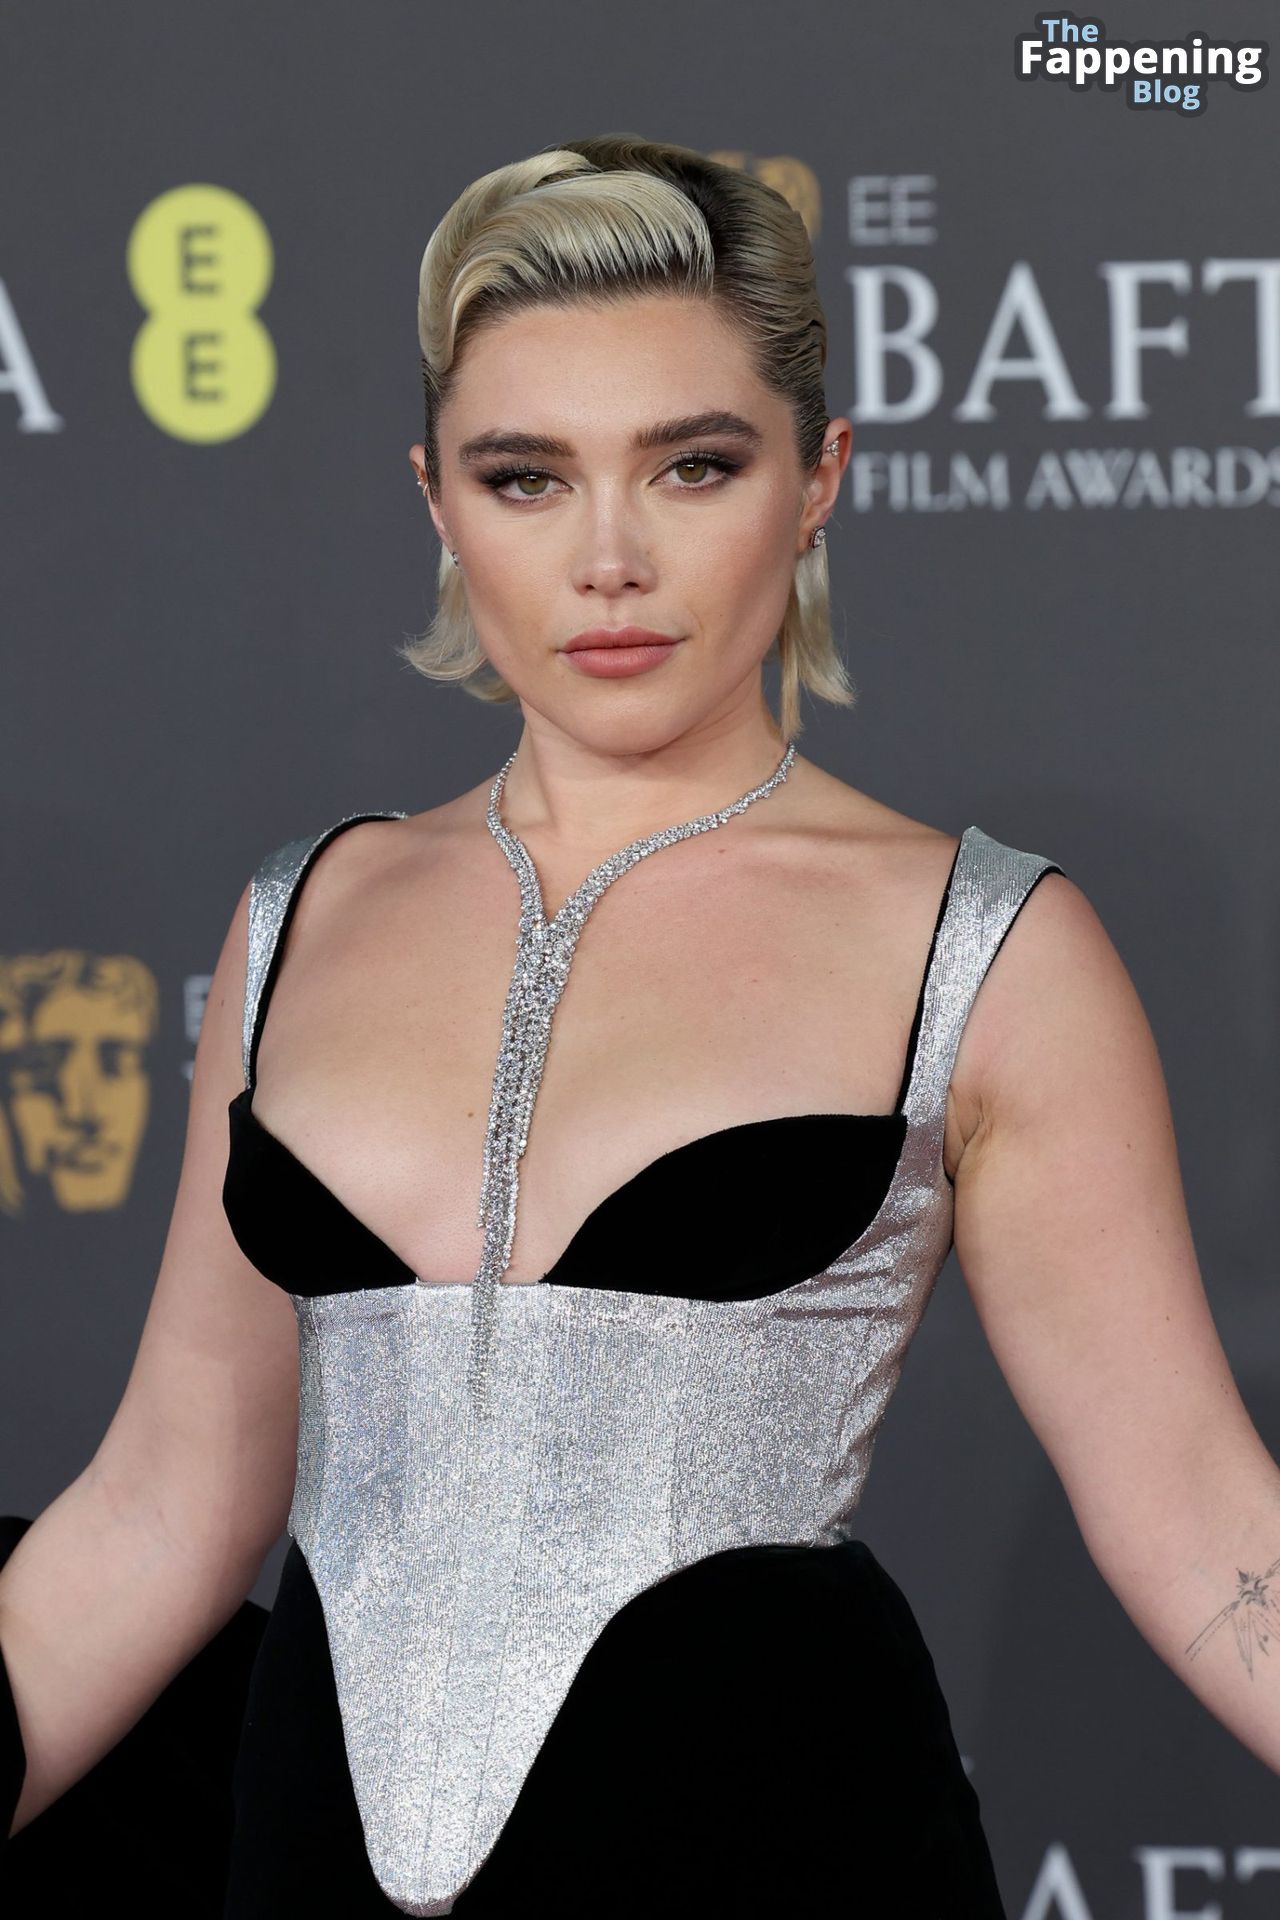 Florence-Pugh-Sexy-2-The-Fappening-Blog-2.jpg